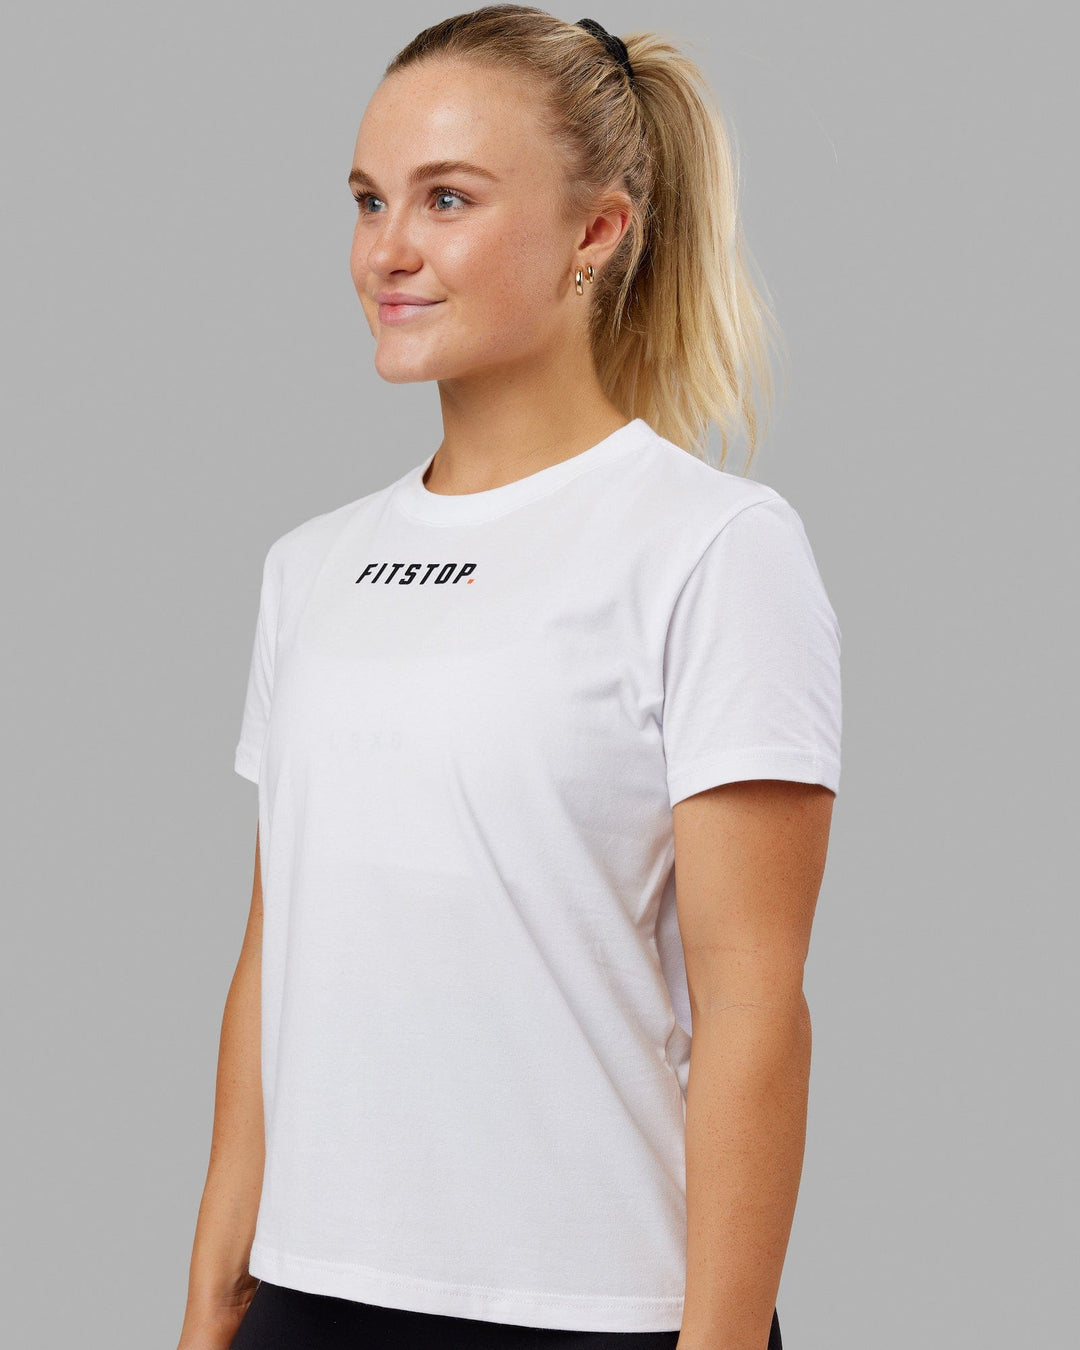 Fitstop Fast Tee - White